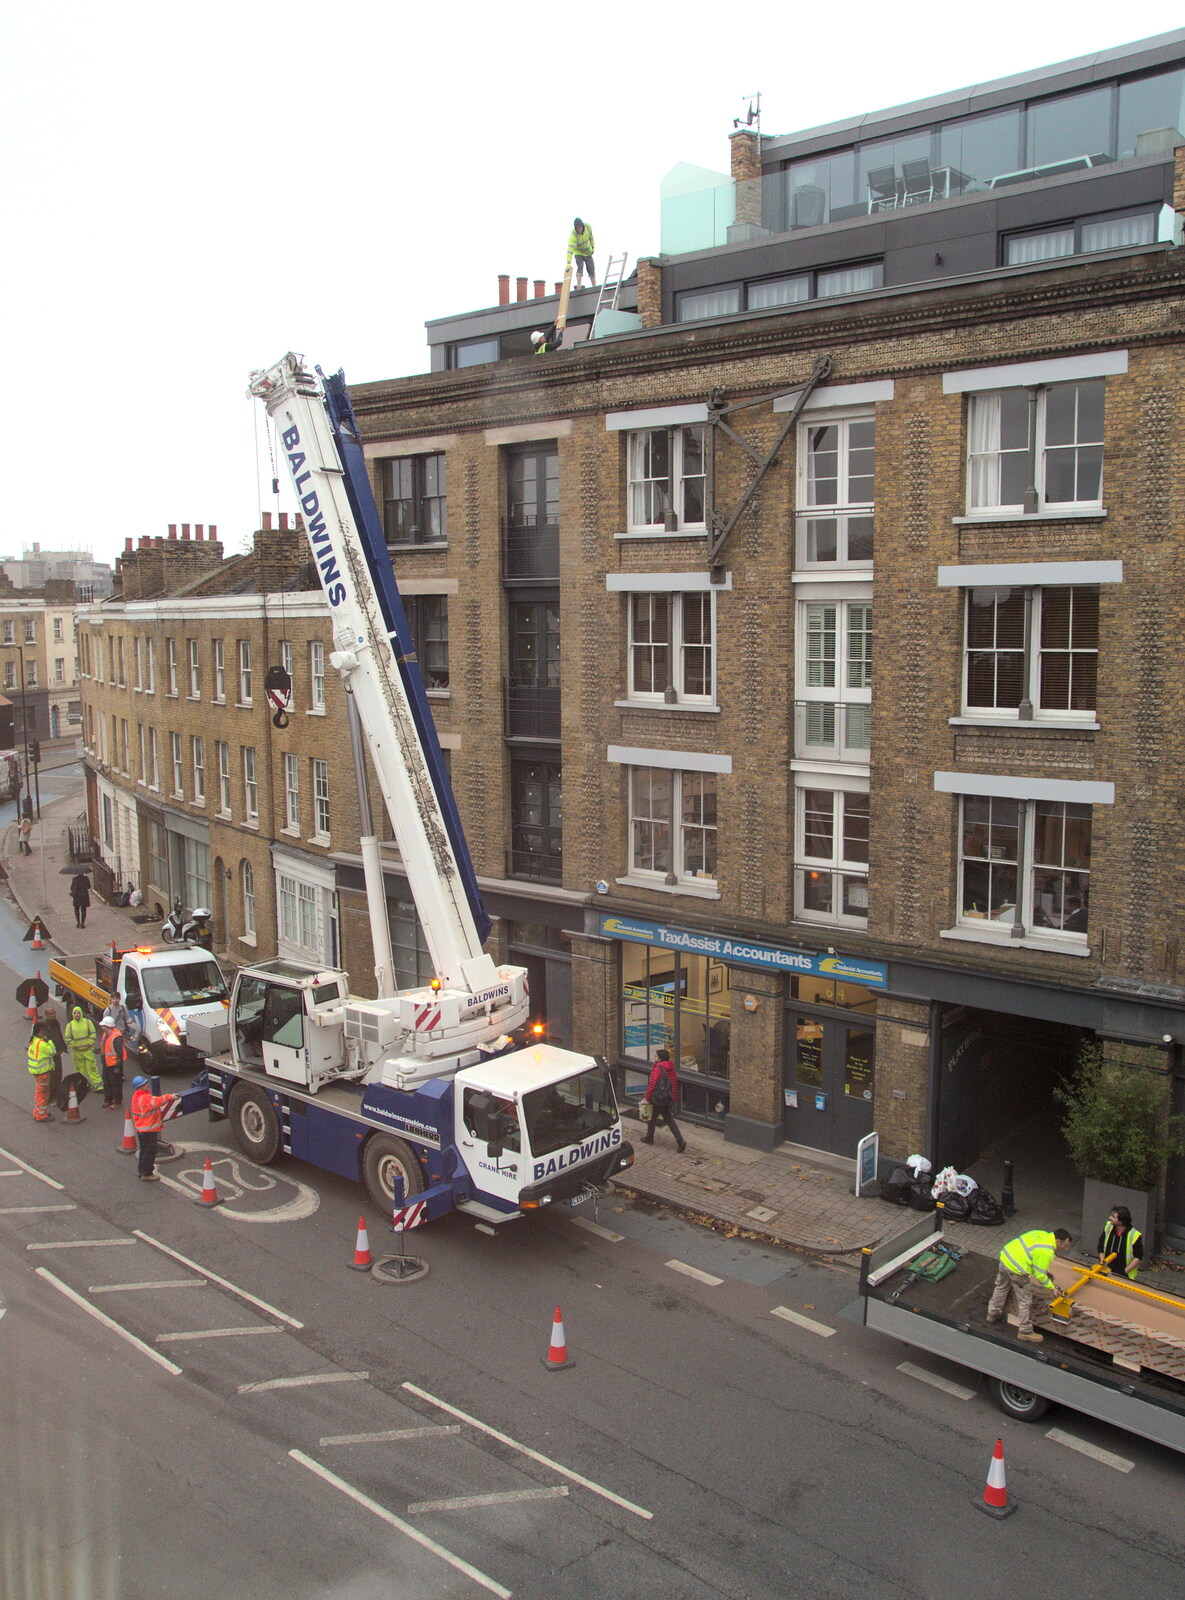 There's much activity on Southwark Bridge Road from Hot-tub Penthouse, Thornham Walks, and Building, London and Suffolk - 12th November 2015